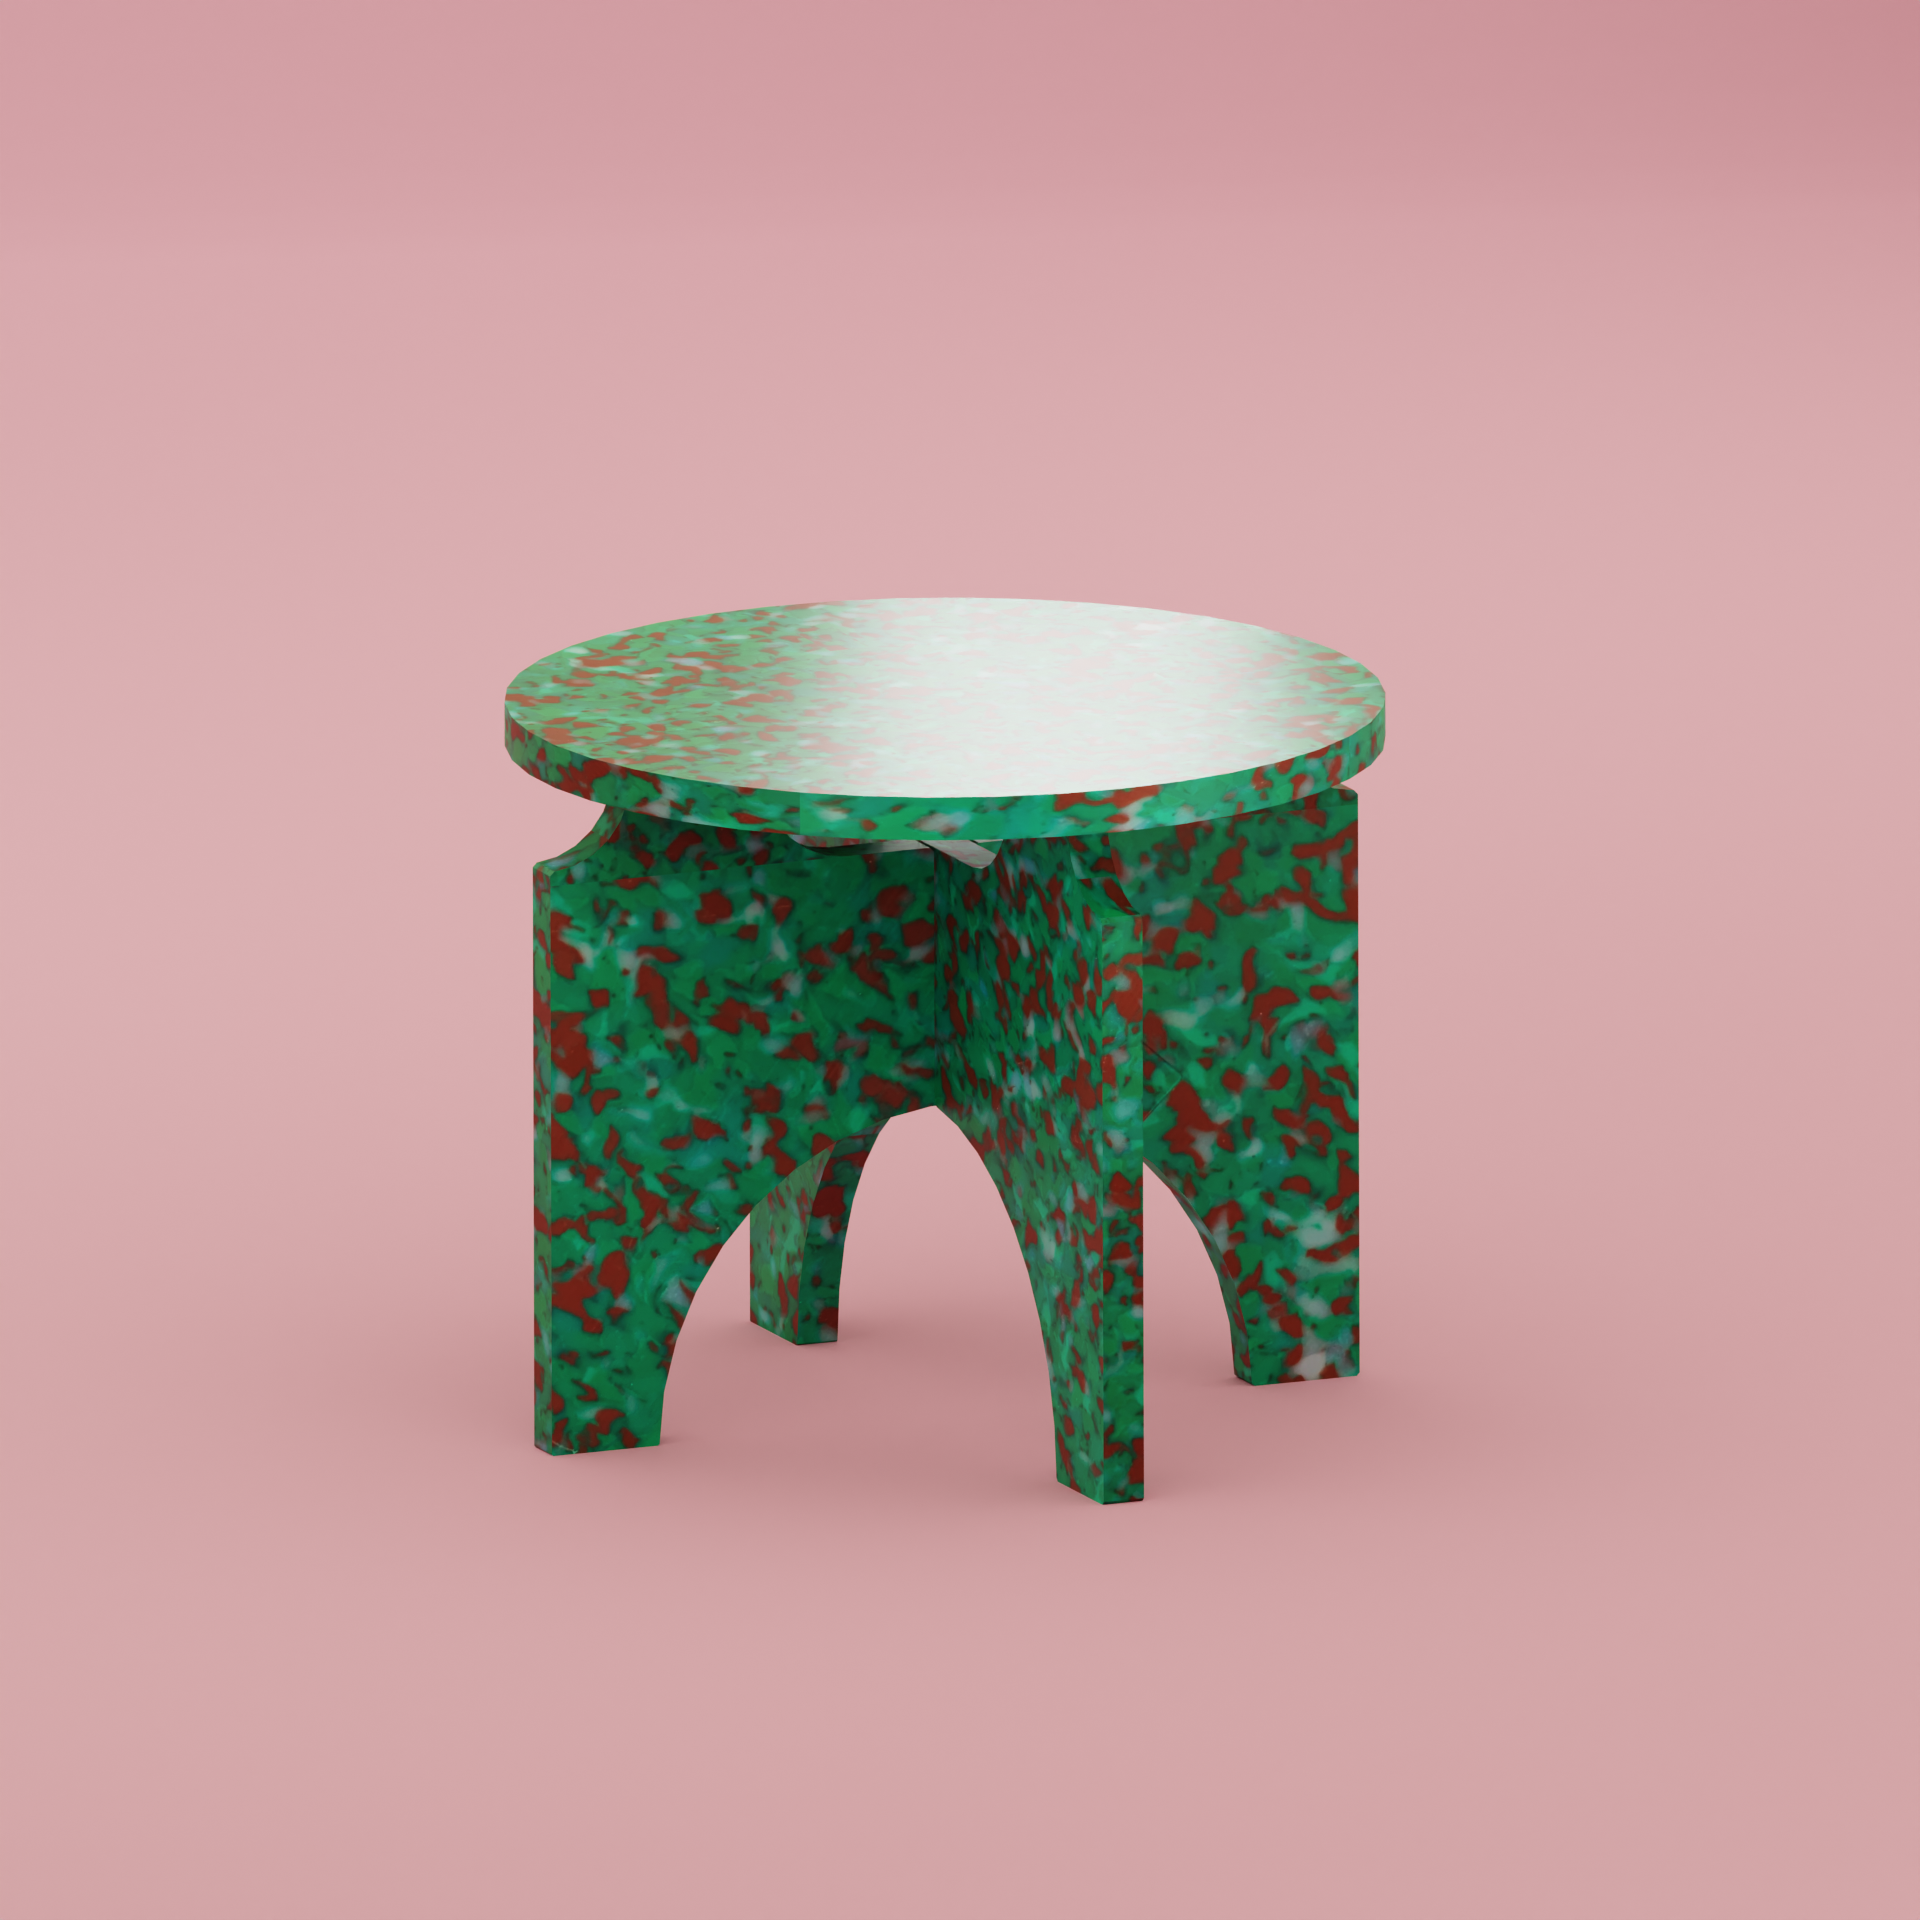 STOOL BY THE MINIMONO PROJECT - BRAND FOR ECO FRIENDLY - PLAYFUL - MULTI FUNCTIONAL - SUSTAINABLE - HIGH QUALITY - DESIGN FURNITURE FROM RECYCLED PLASTIC FOR BOTH ADULT AND CHILDREN MADE IN BERLIN GERMANY